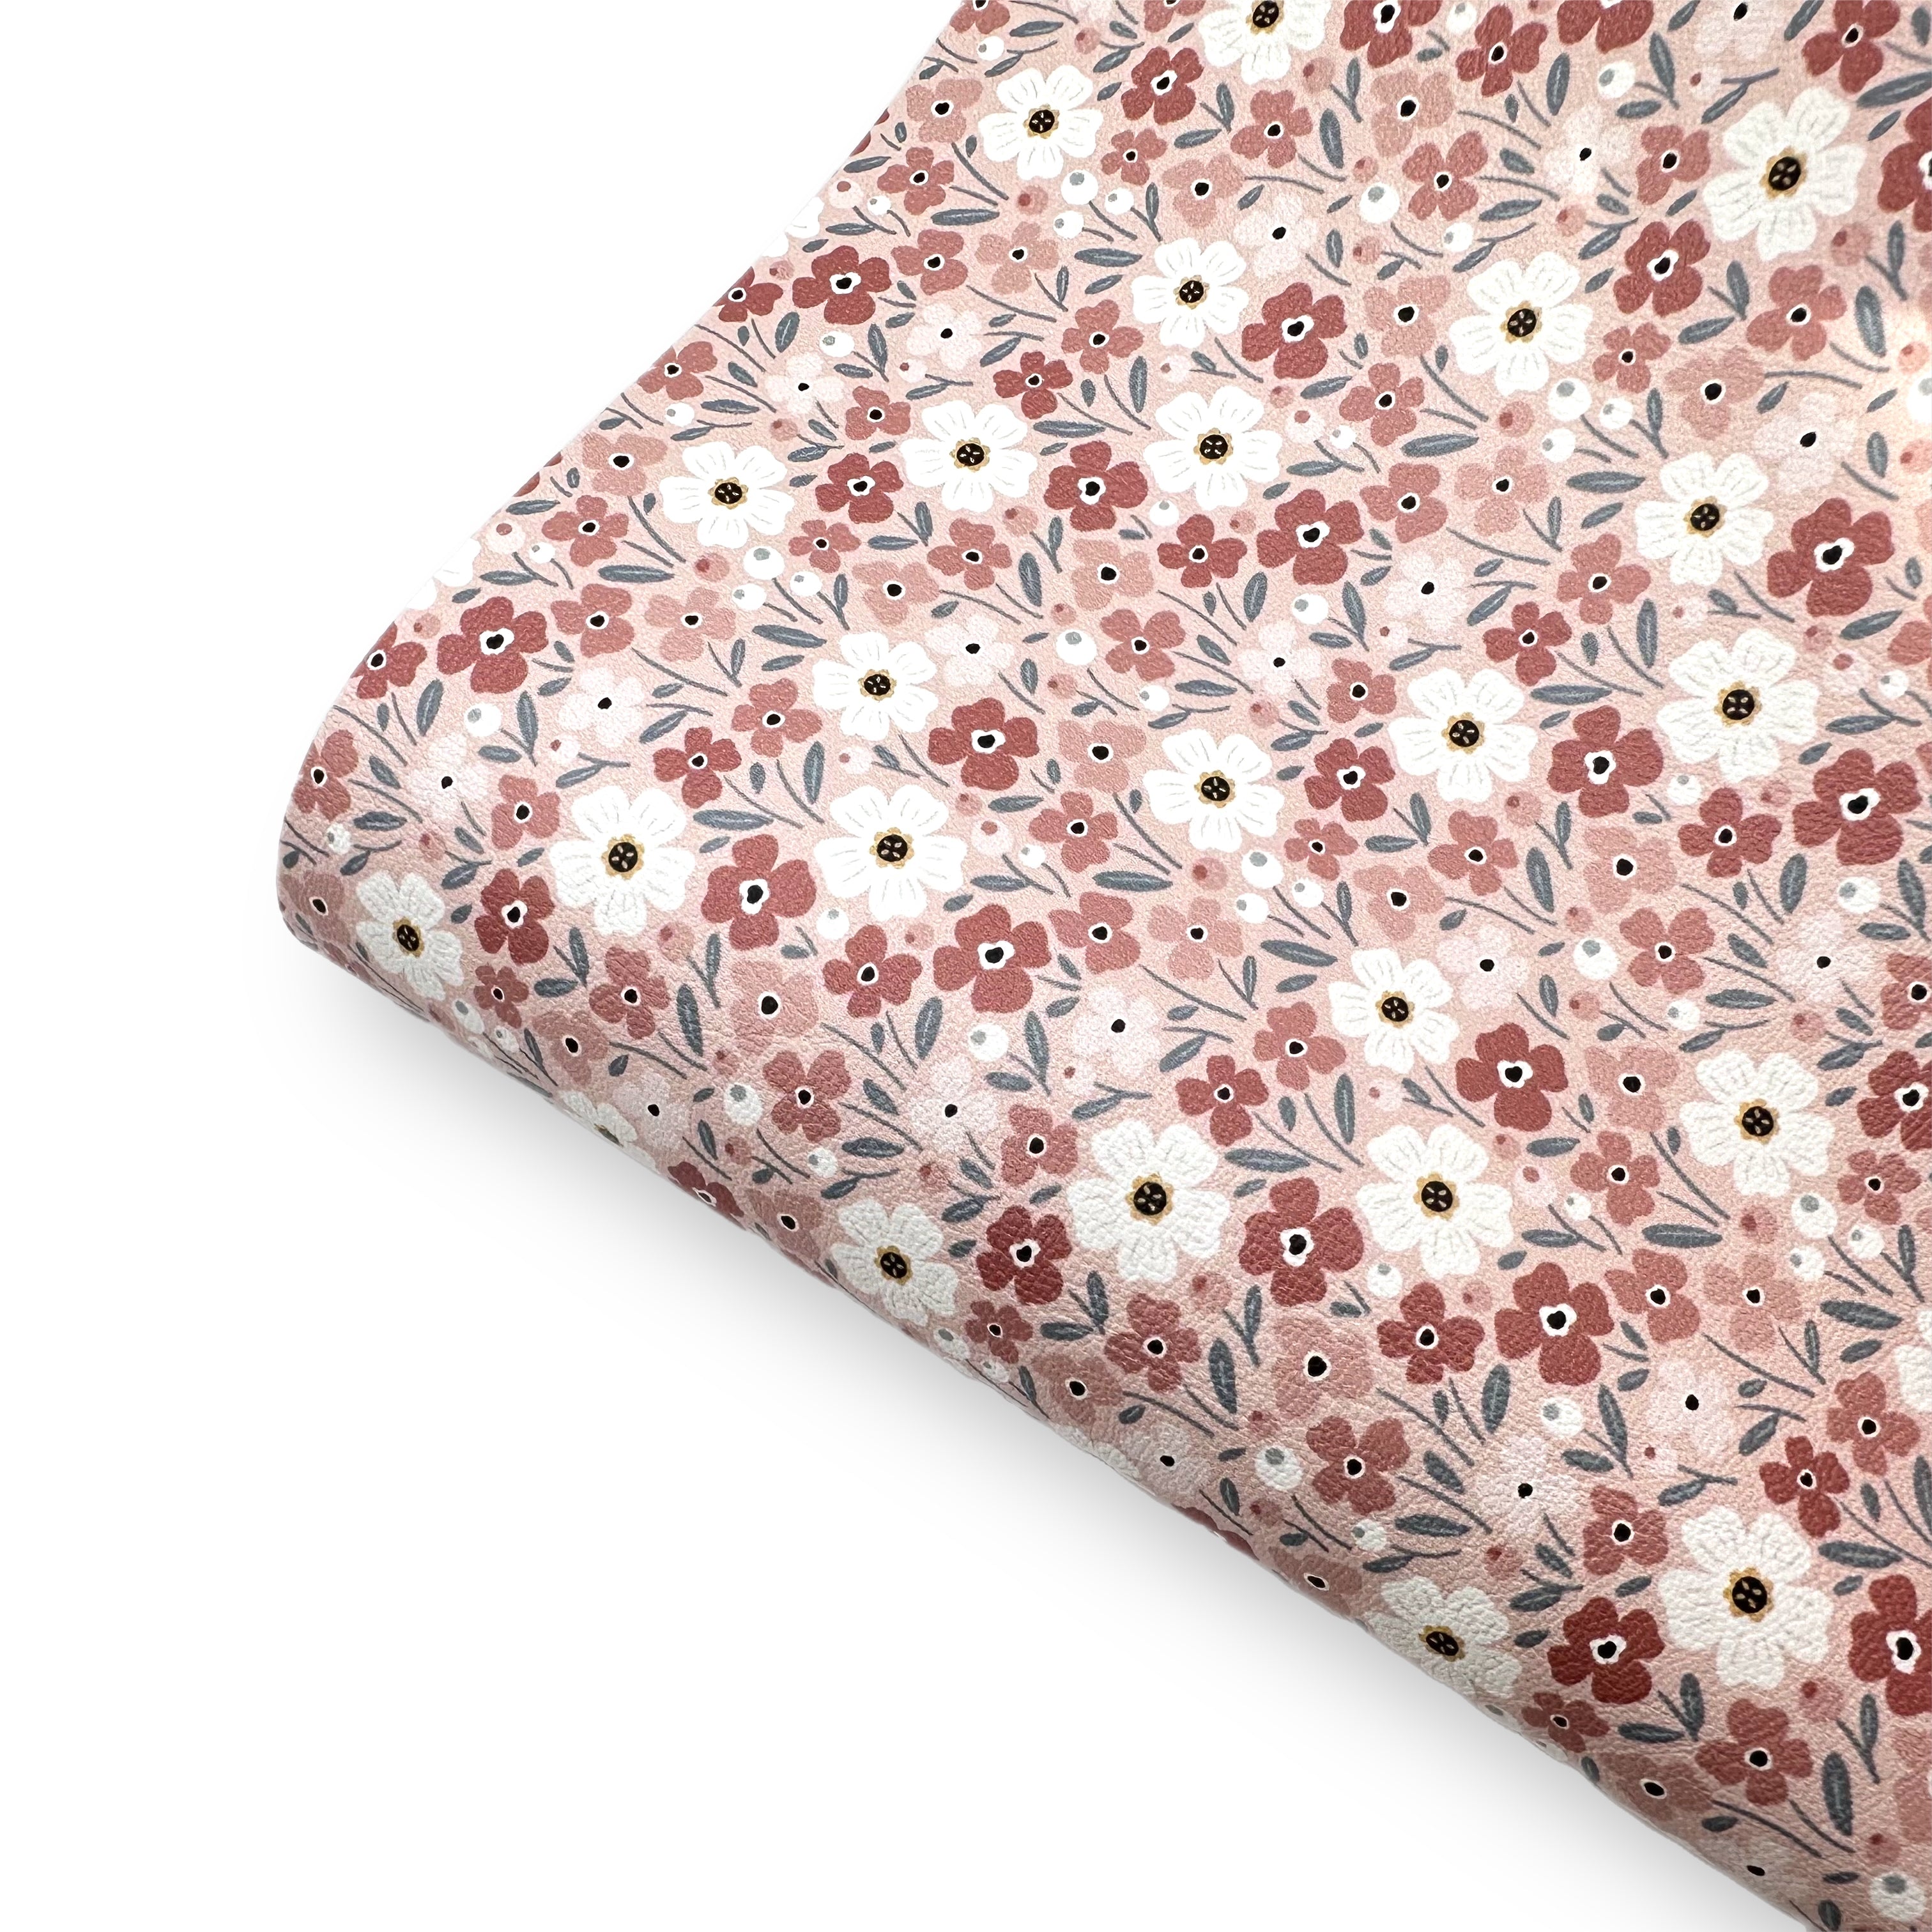 Ditsy Pink Autumn Florals Premium Faux Leather Fabric Sheets